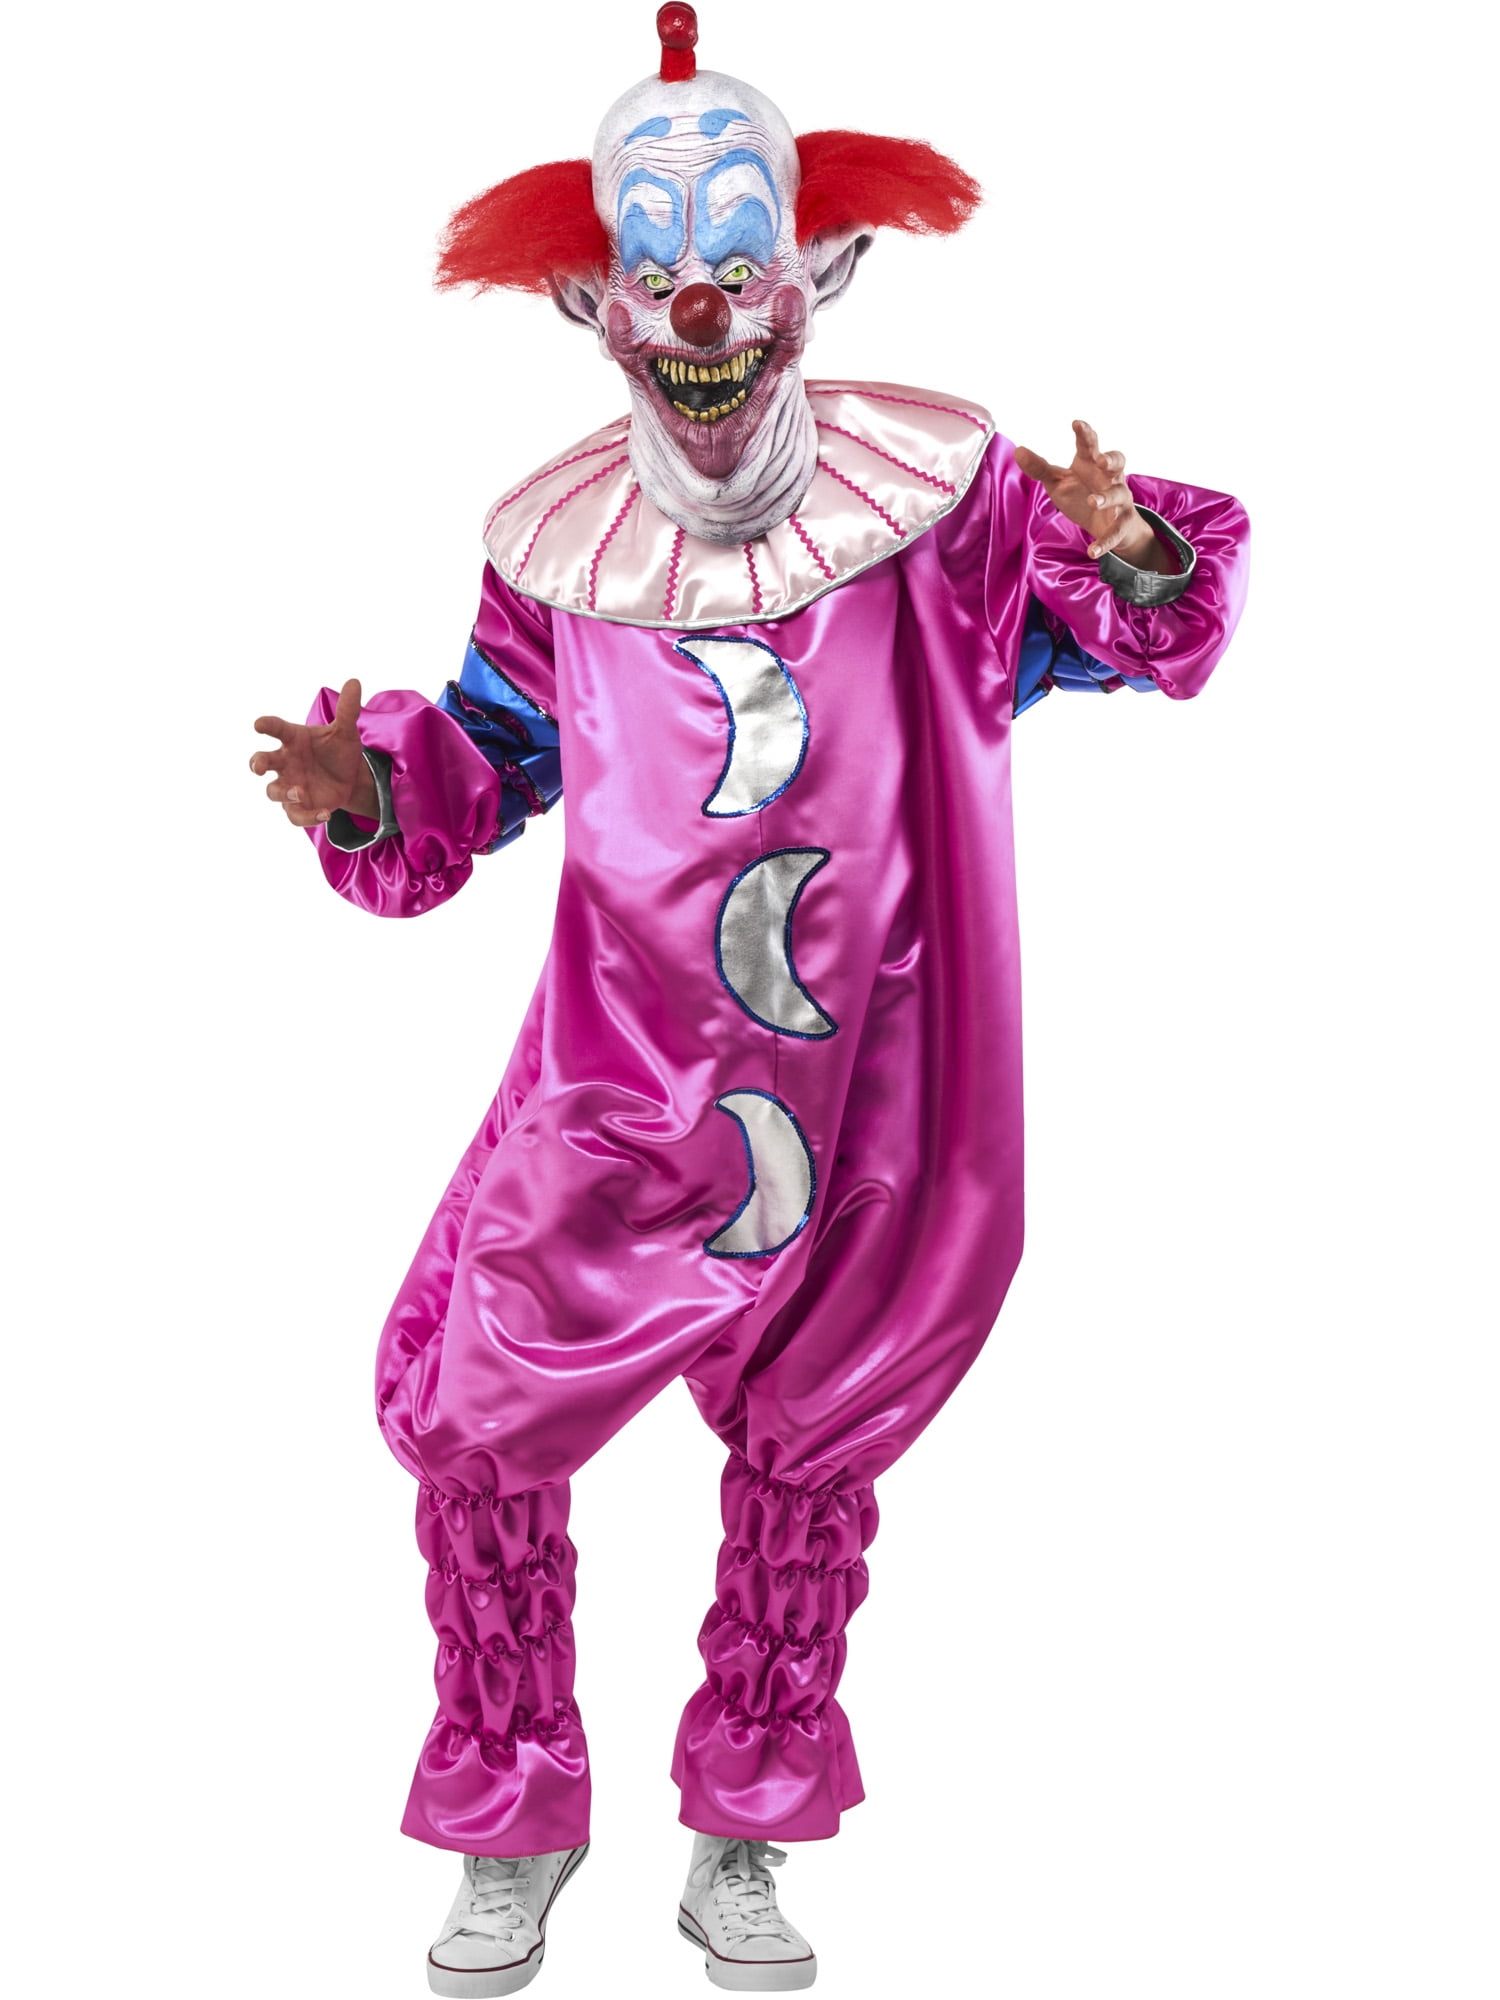 Killer Klowns from Outer Space: Slim Adult Mask - Walmart.com